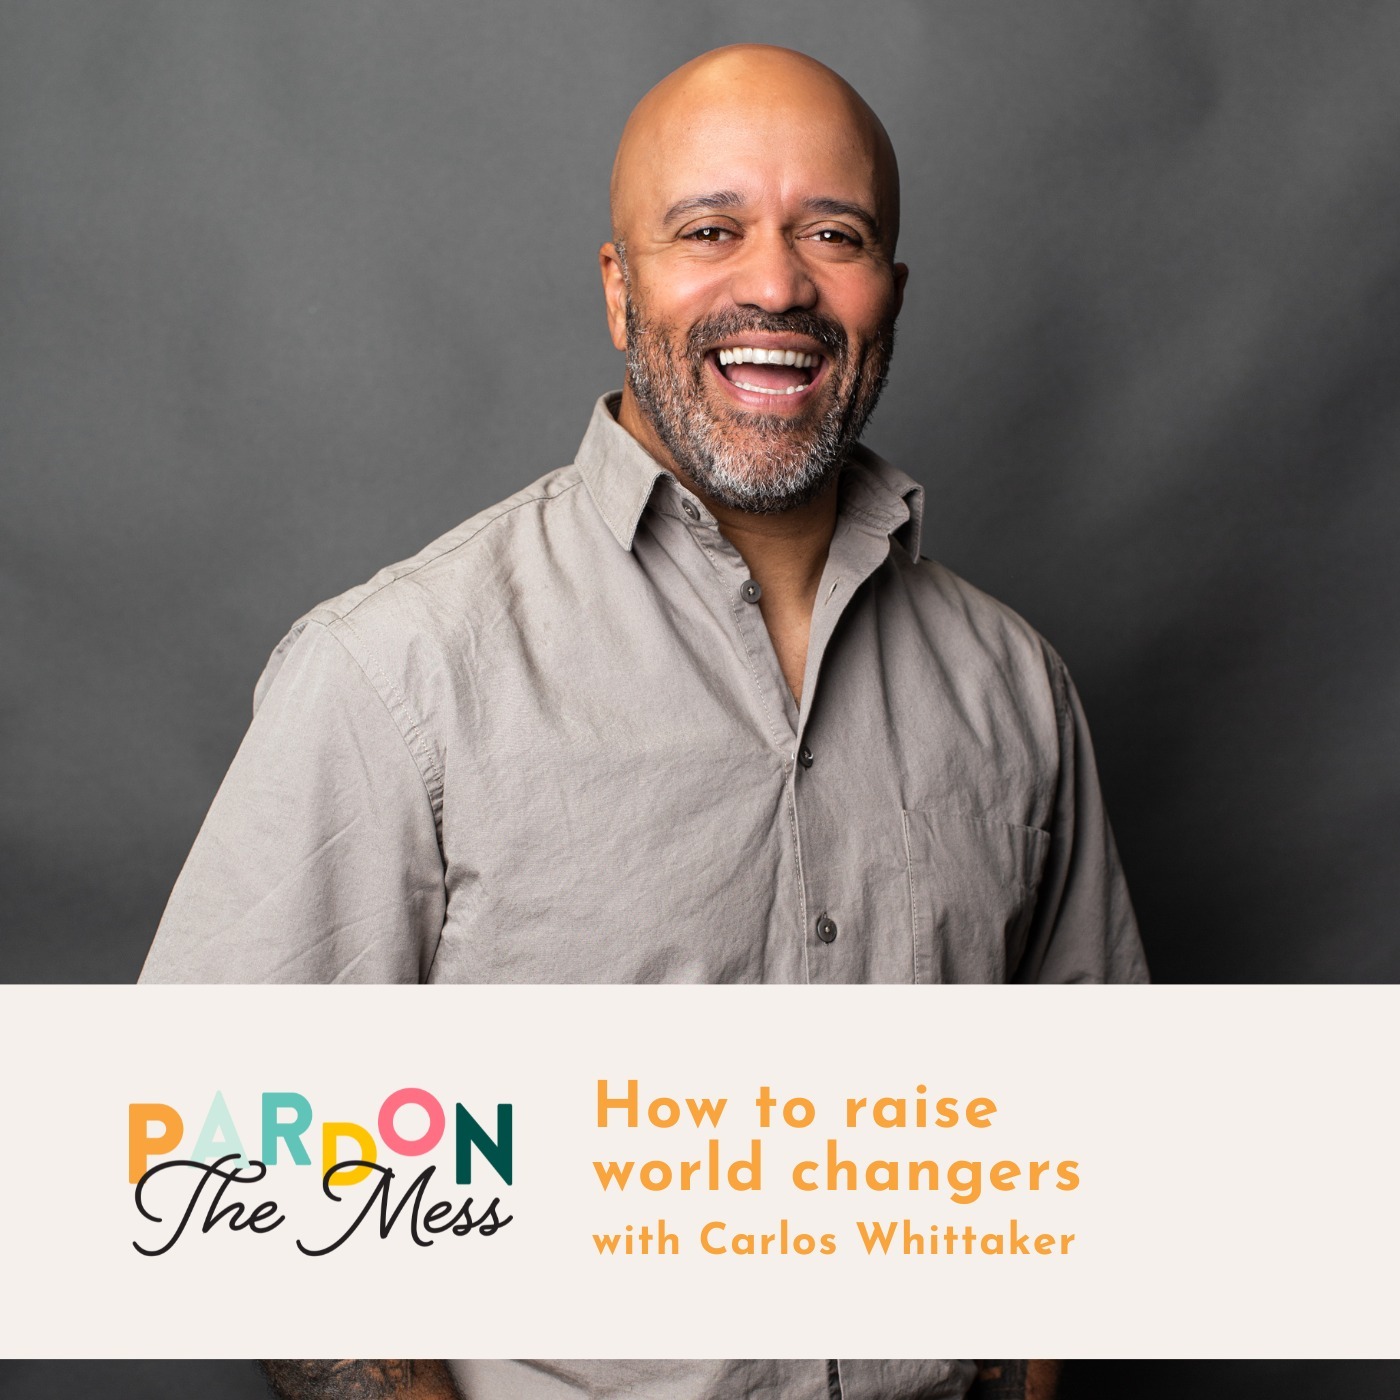 How to raise world changers with Carlos Whittaker